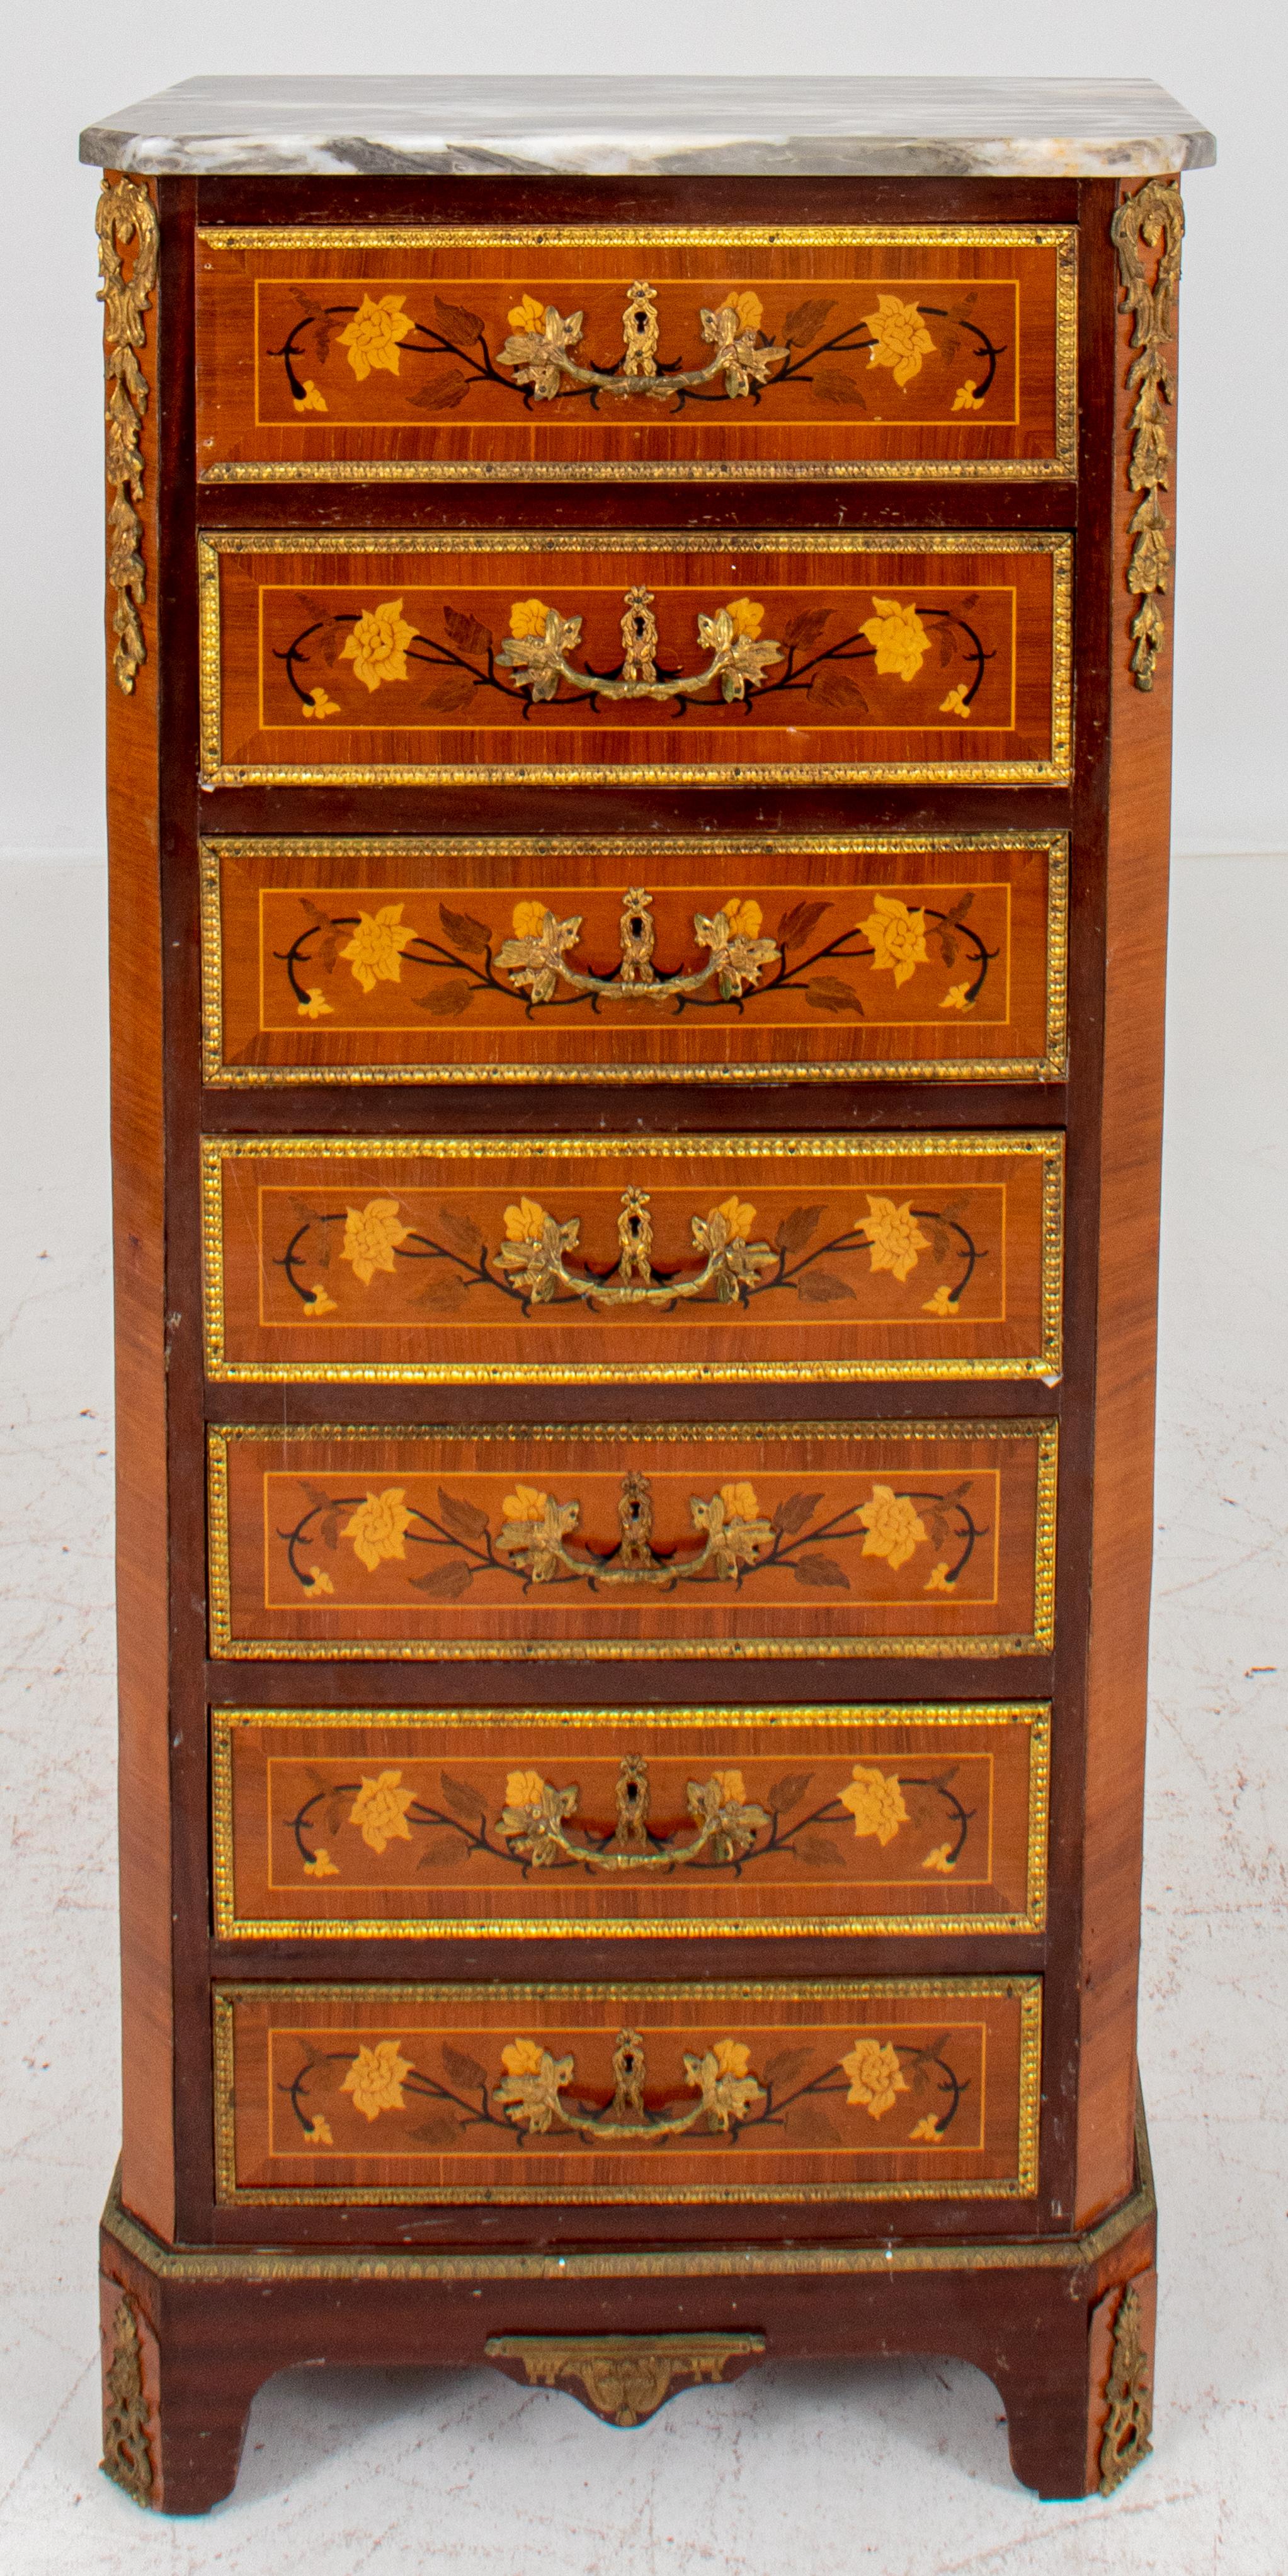 Louis XVI style ormolu-mounted marquetry semainier or seven-drawered tall dresser, rectangular with a gray onyx top, each drawer with floral marquetry designs, the whole with floral mounts.

Dealer: S138XX